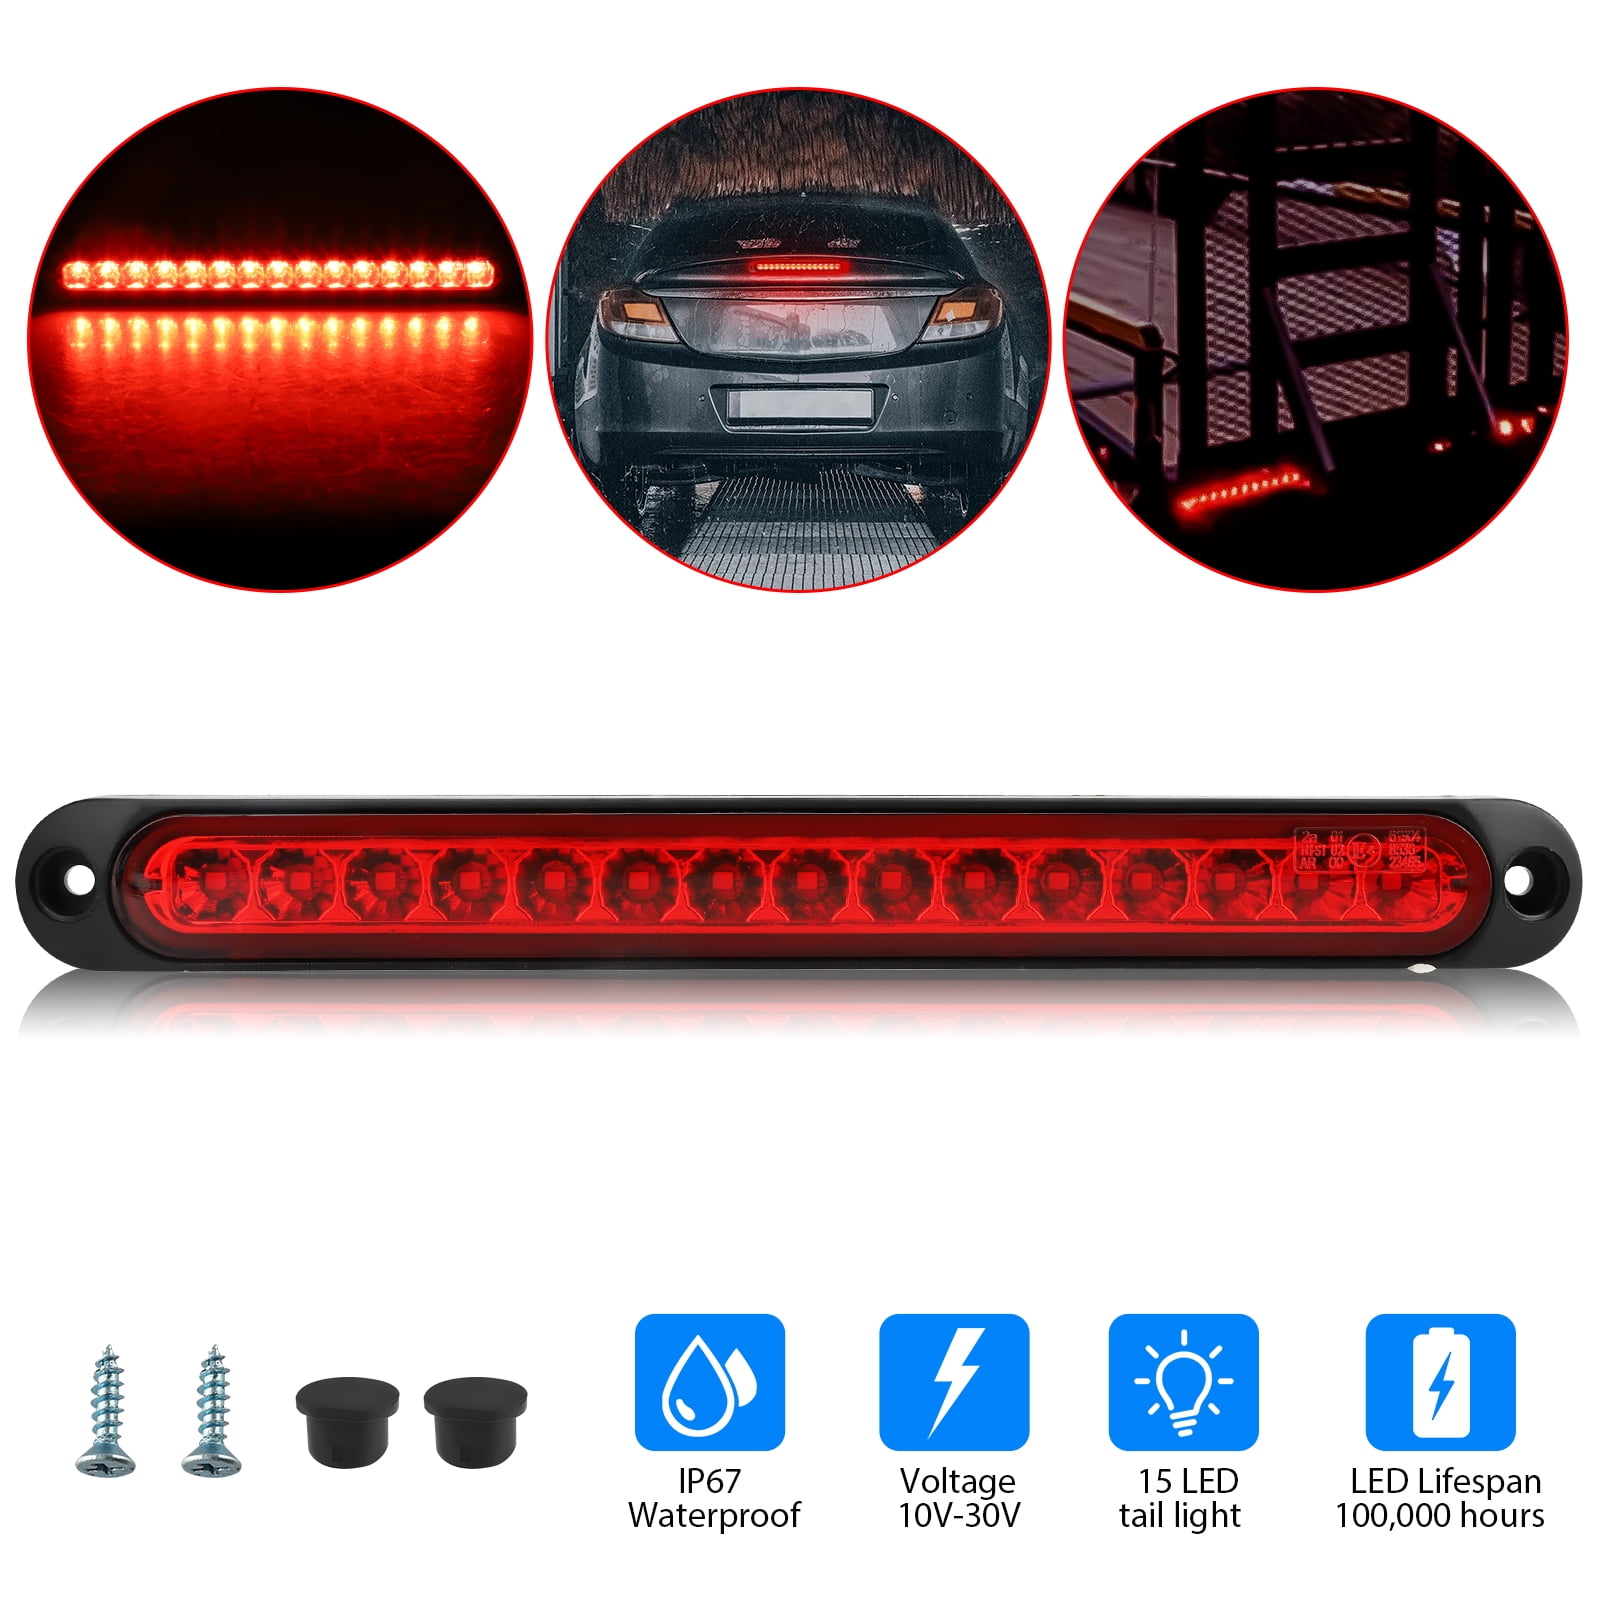 2 x 4 Function Square Tail Light/Lamp E Approved 12V Trailers/Vans/Boards/Trucks 